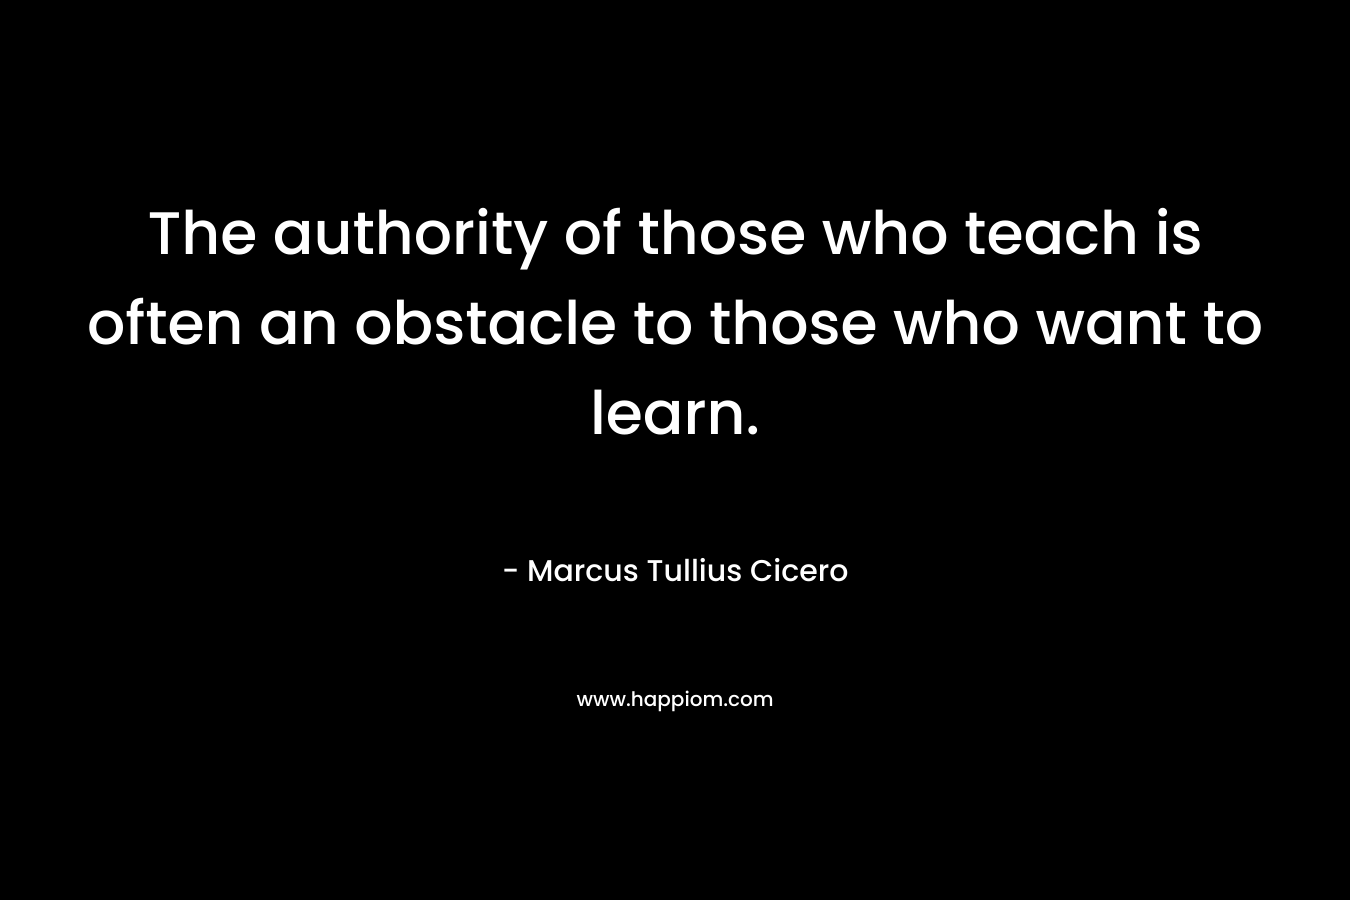 The authority of those who teach is often an obstacle to those who want to learn. – Marcus Tullius Cicero